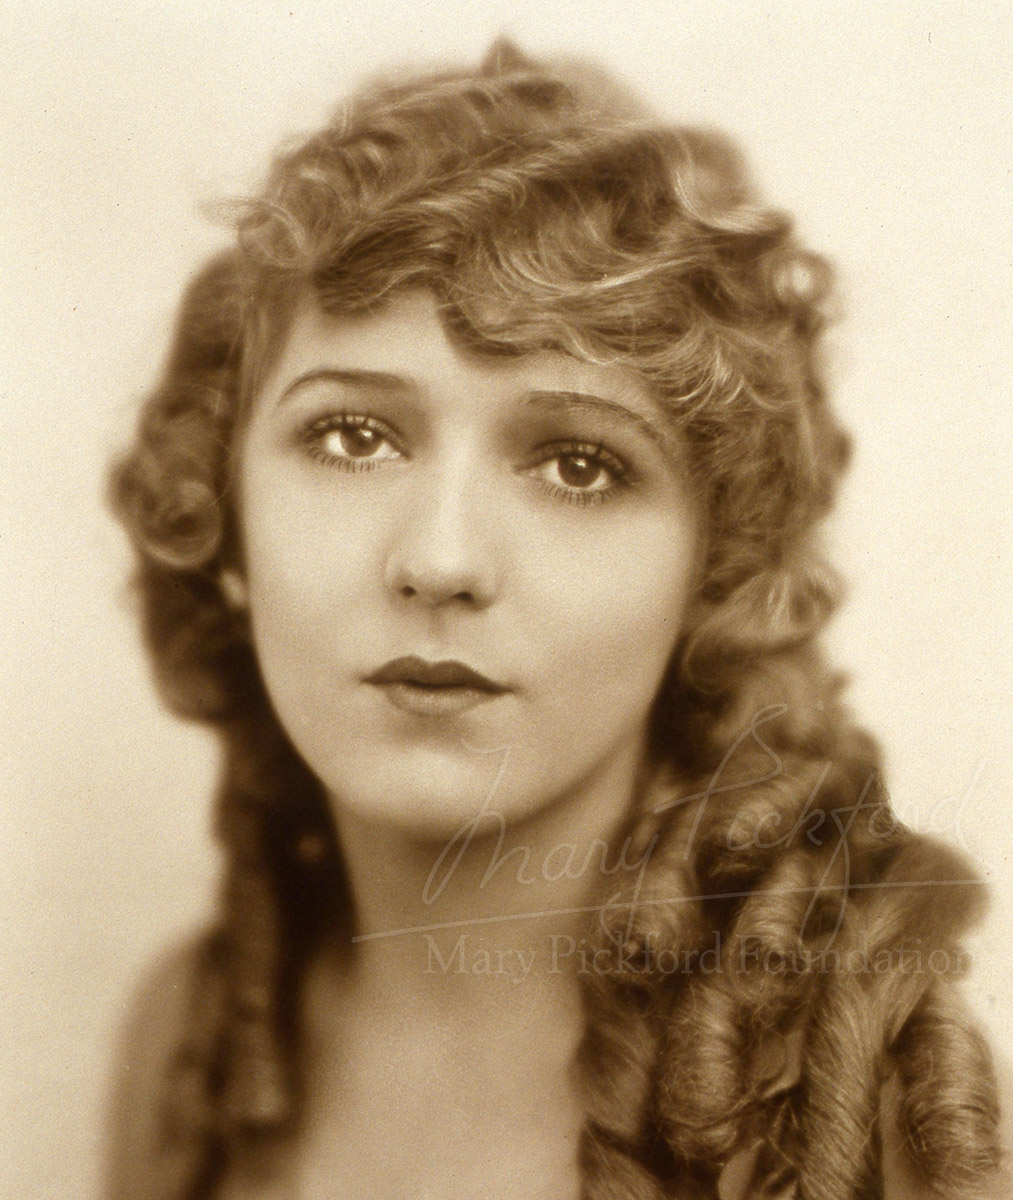 mary-cuts-her-hair-mary-pickford-foundation